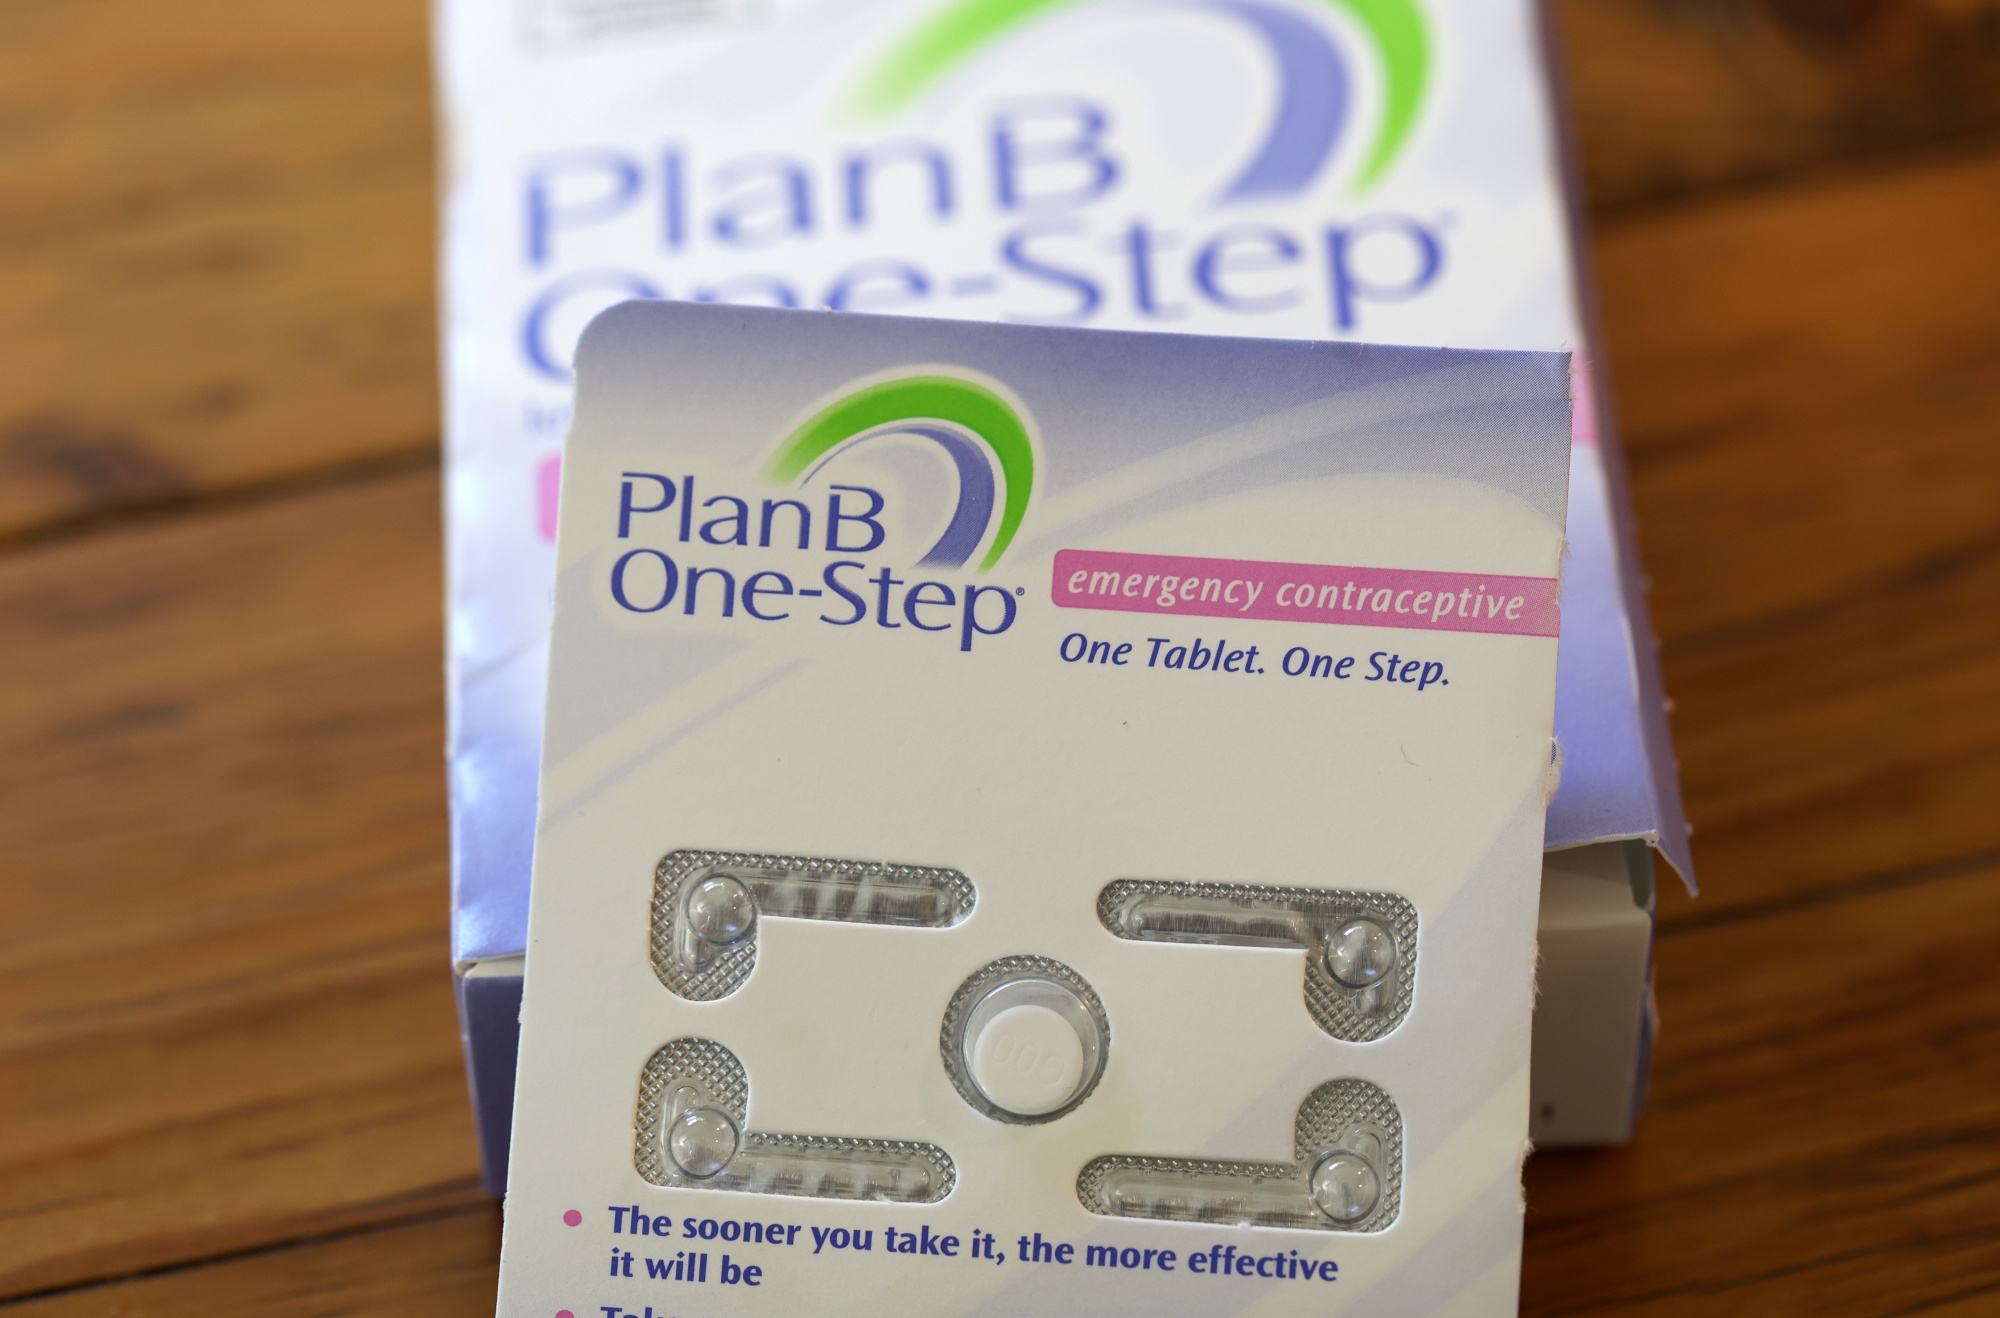 Private Equity Backers of Plan B Morning-After Pill Weigh $4